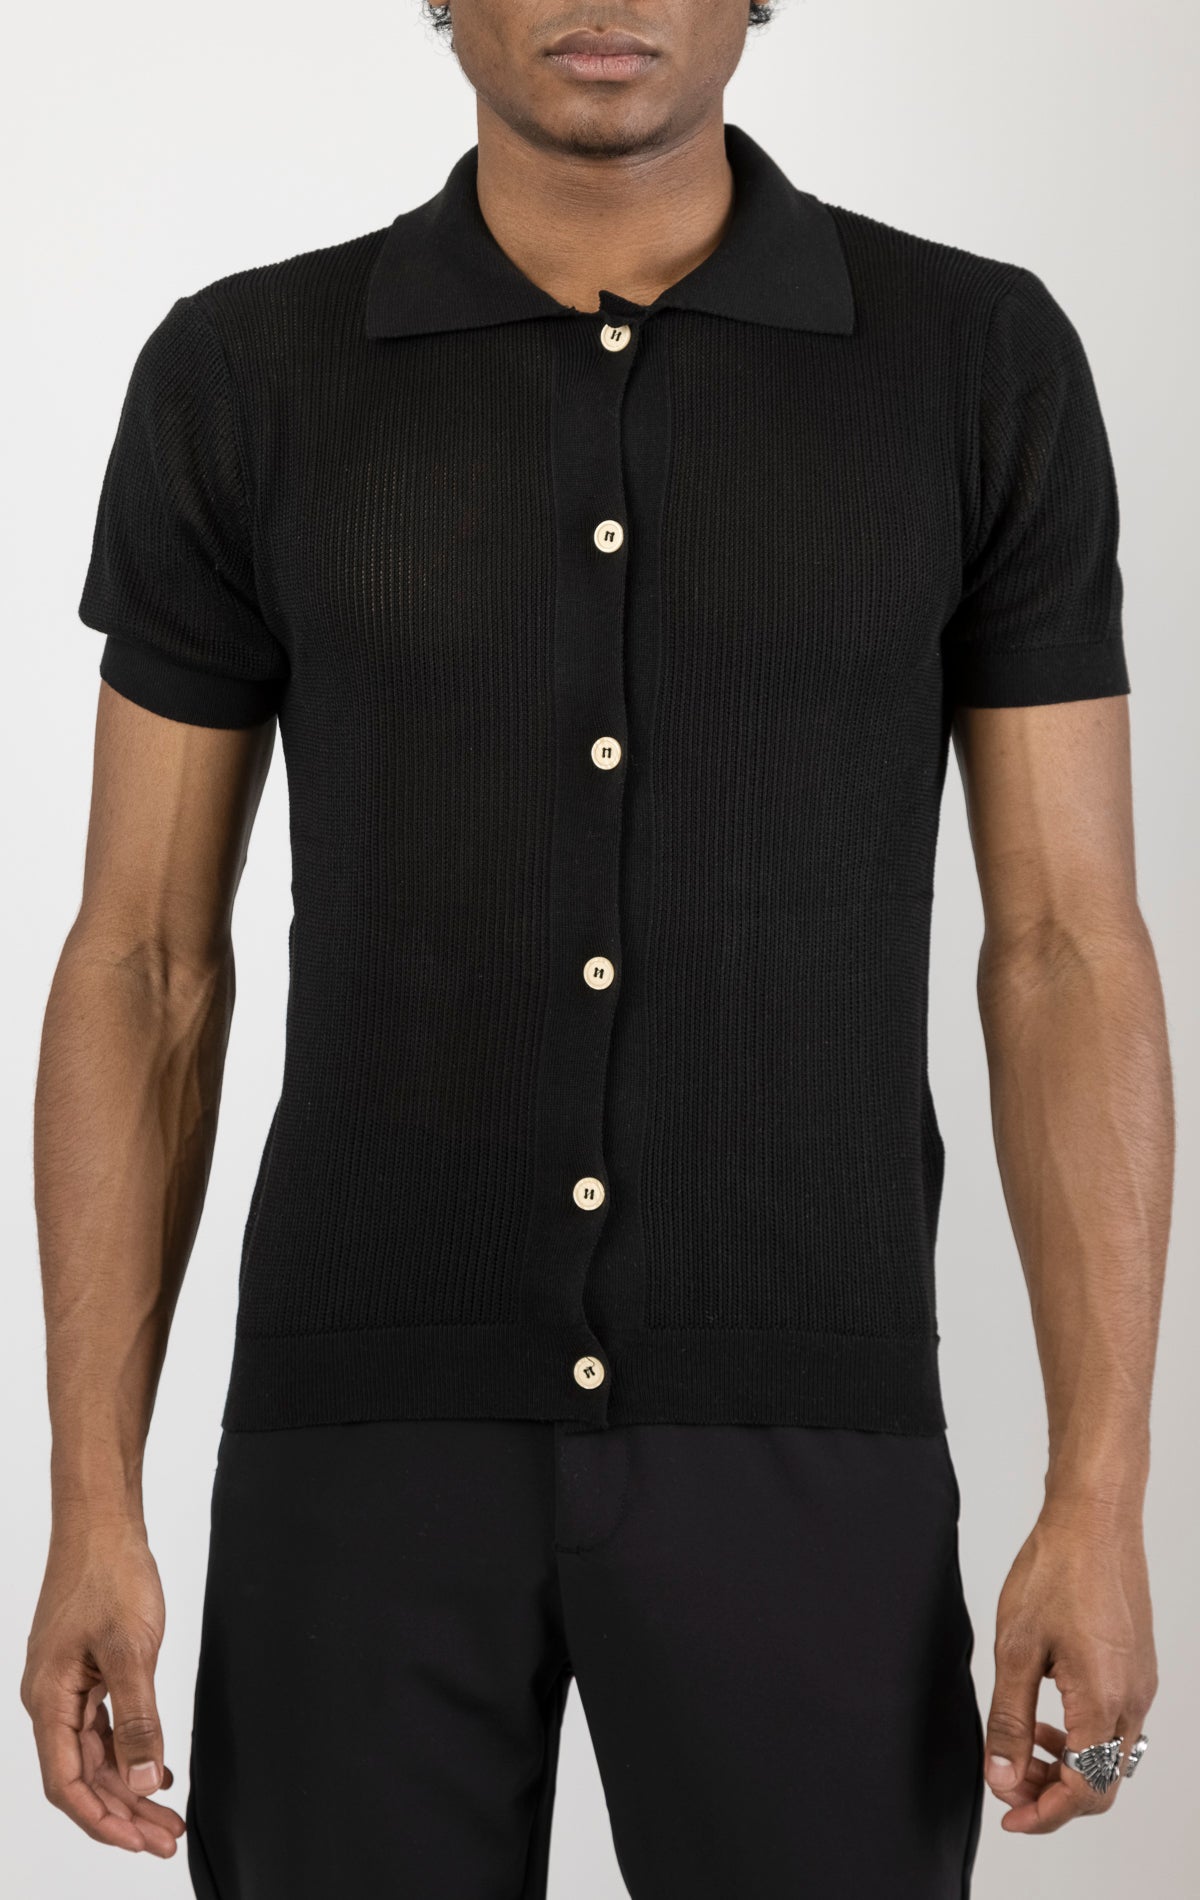 Men's see-through button-down mesh top in black. The top is made from a 50% cotton, 50% acrylic blend and features a tailored fit with a sheer mesh fabric and button-down closure.